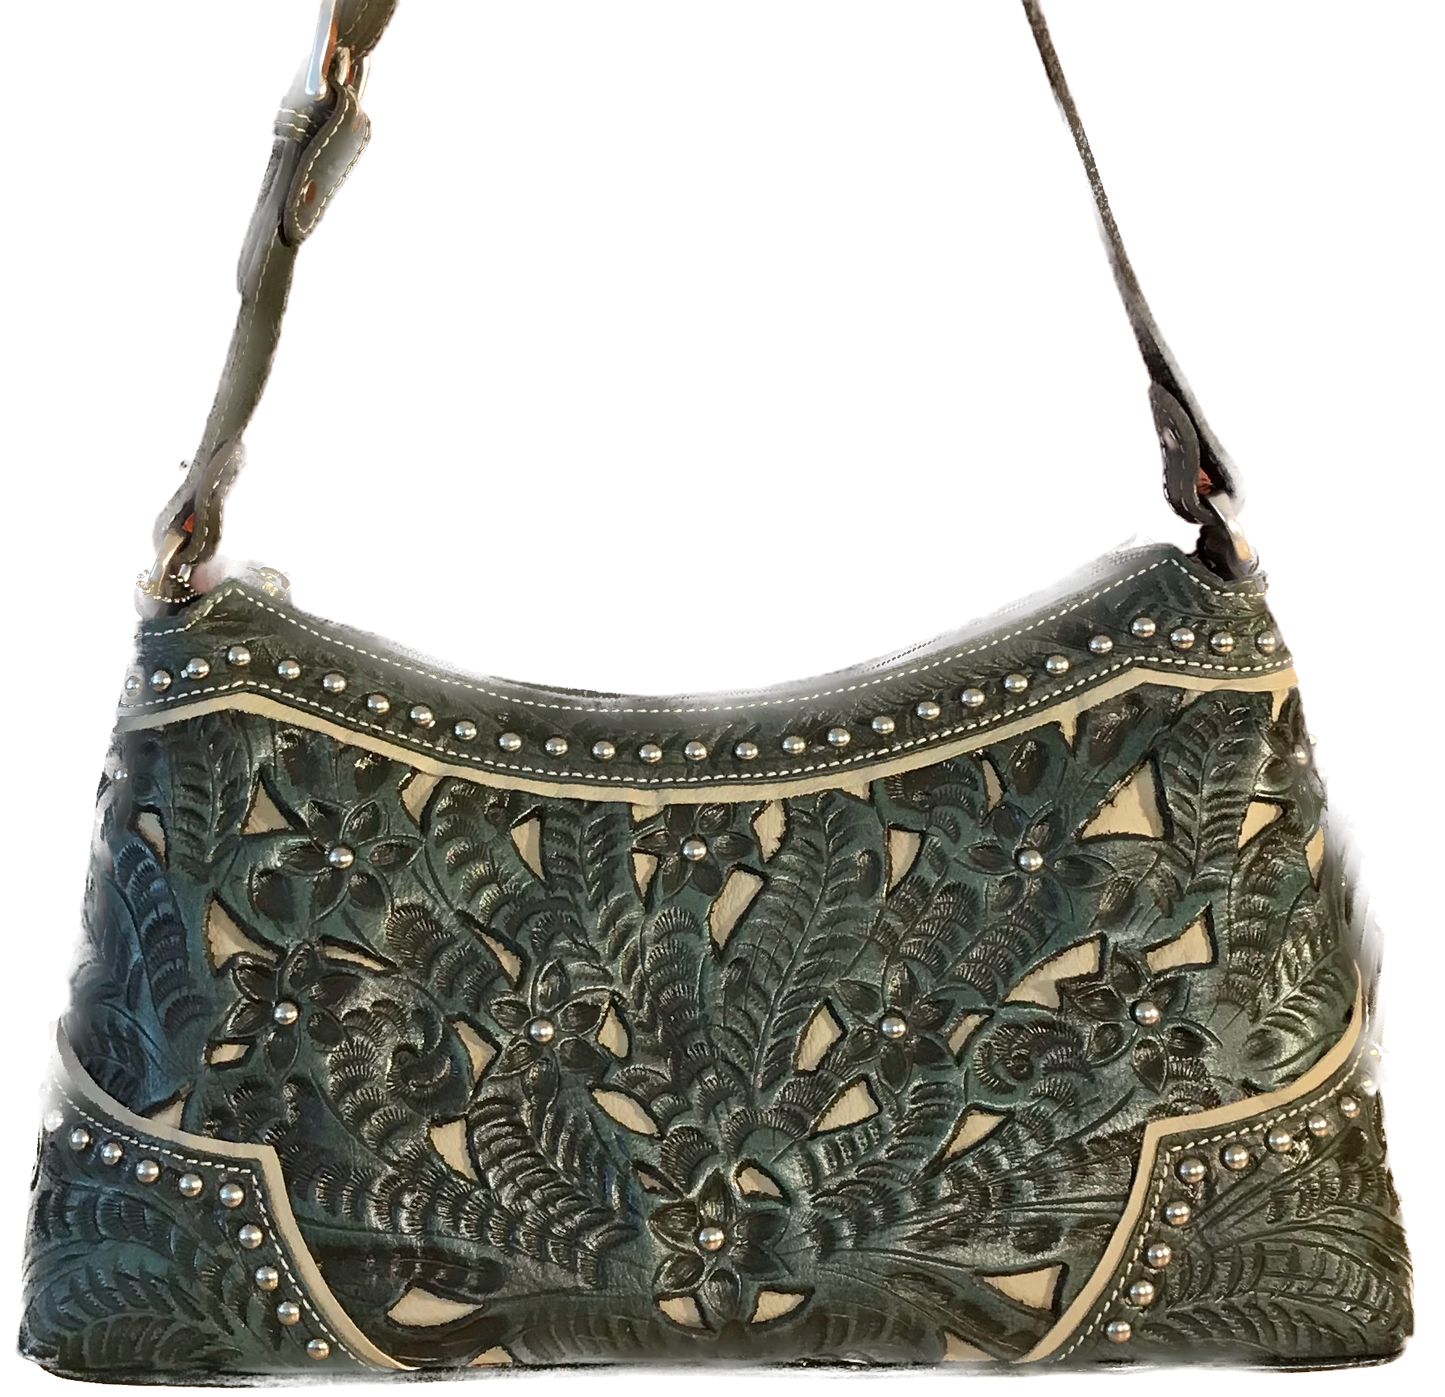 Turquoise Leather Zip-Top Shoulder Bag with Filigree Accents